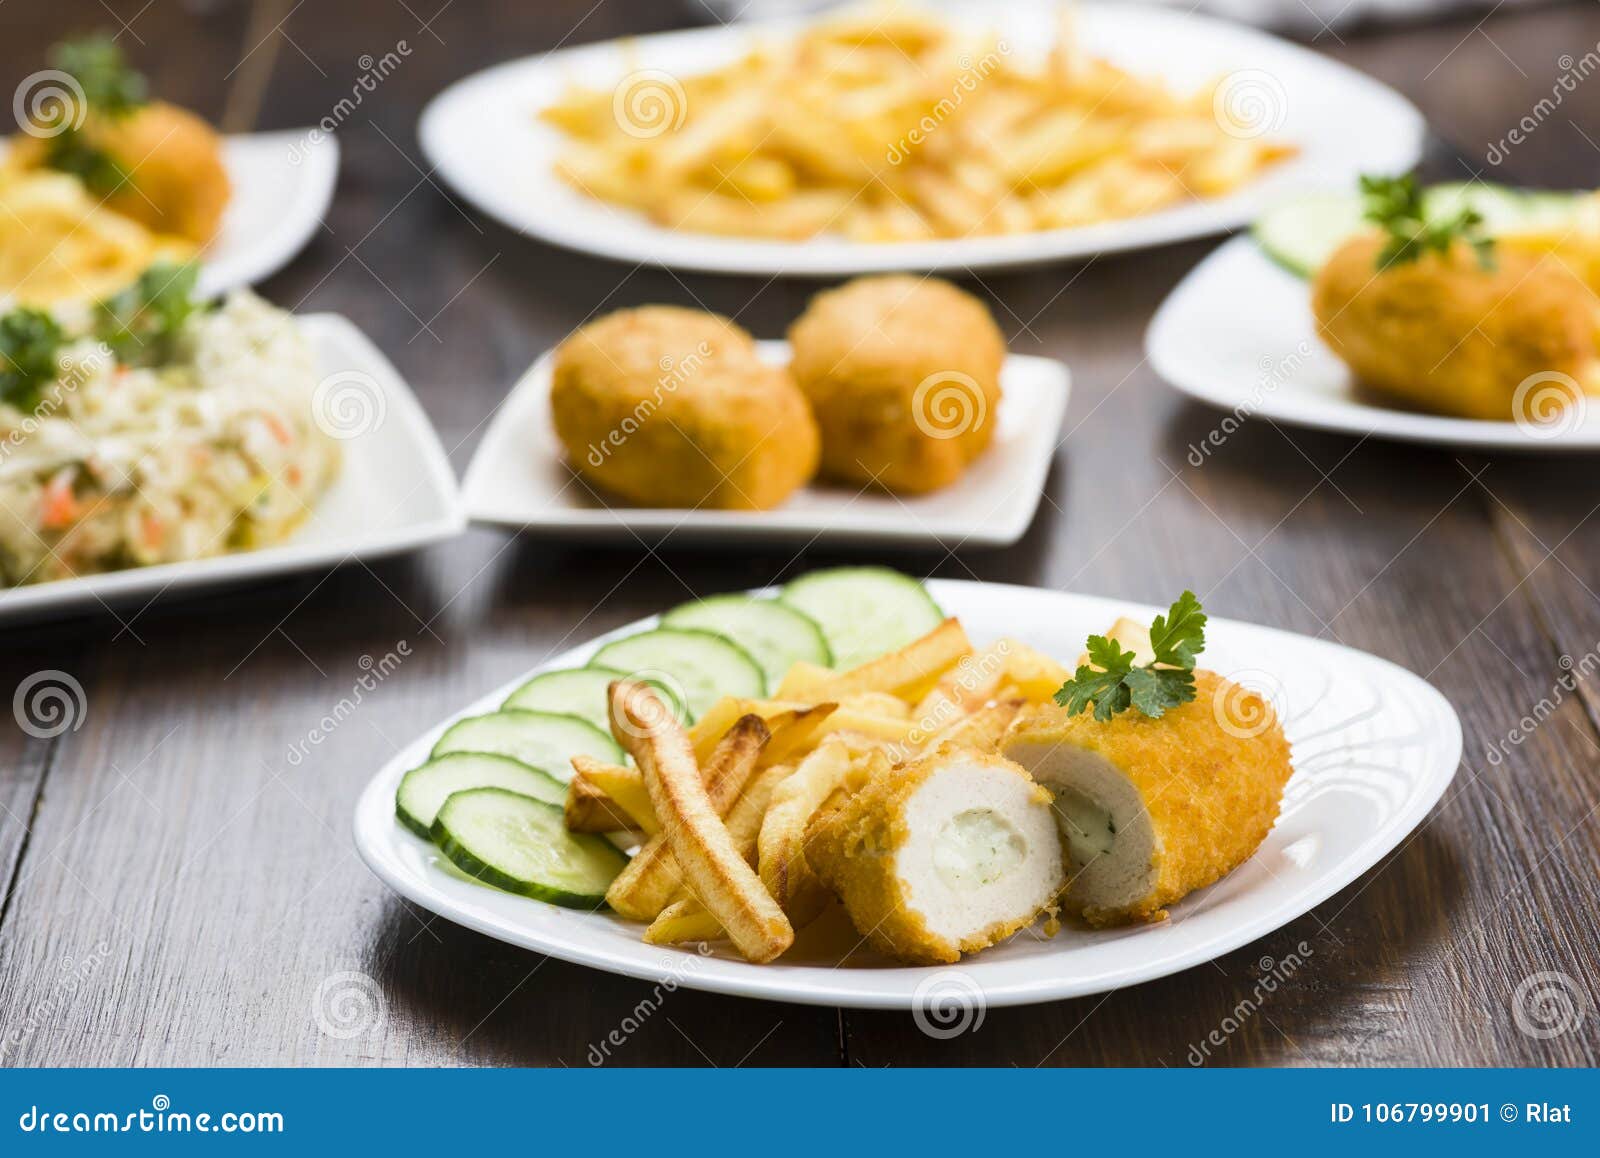 cutlet de volaille with fries